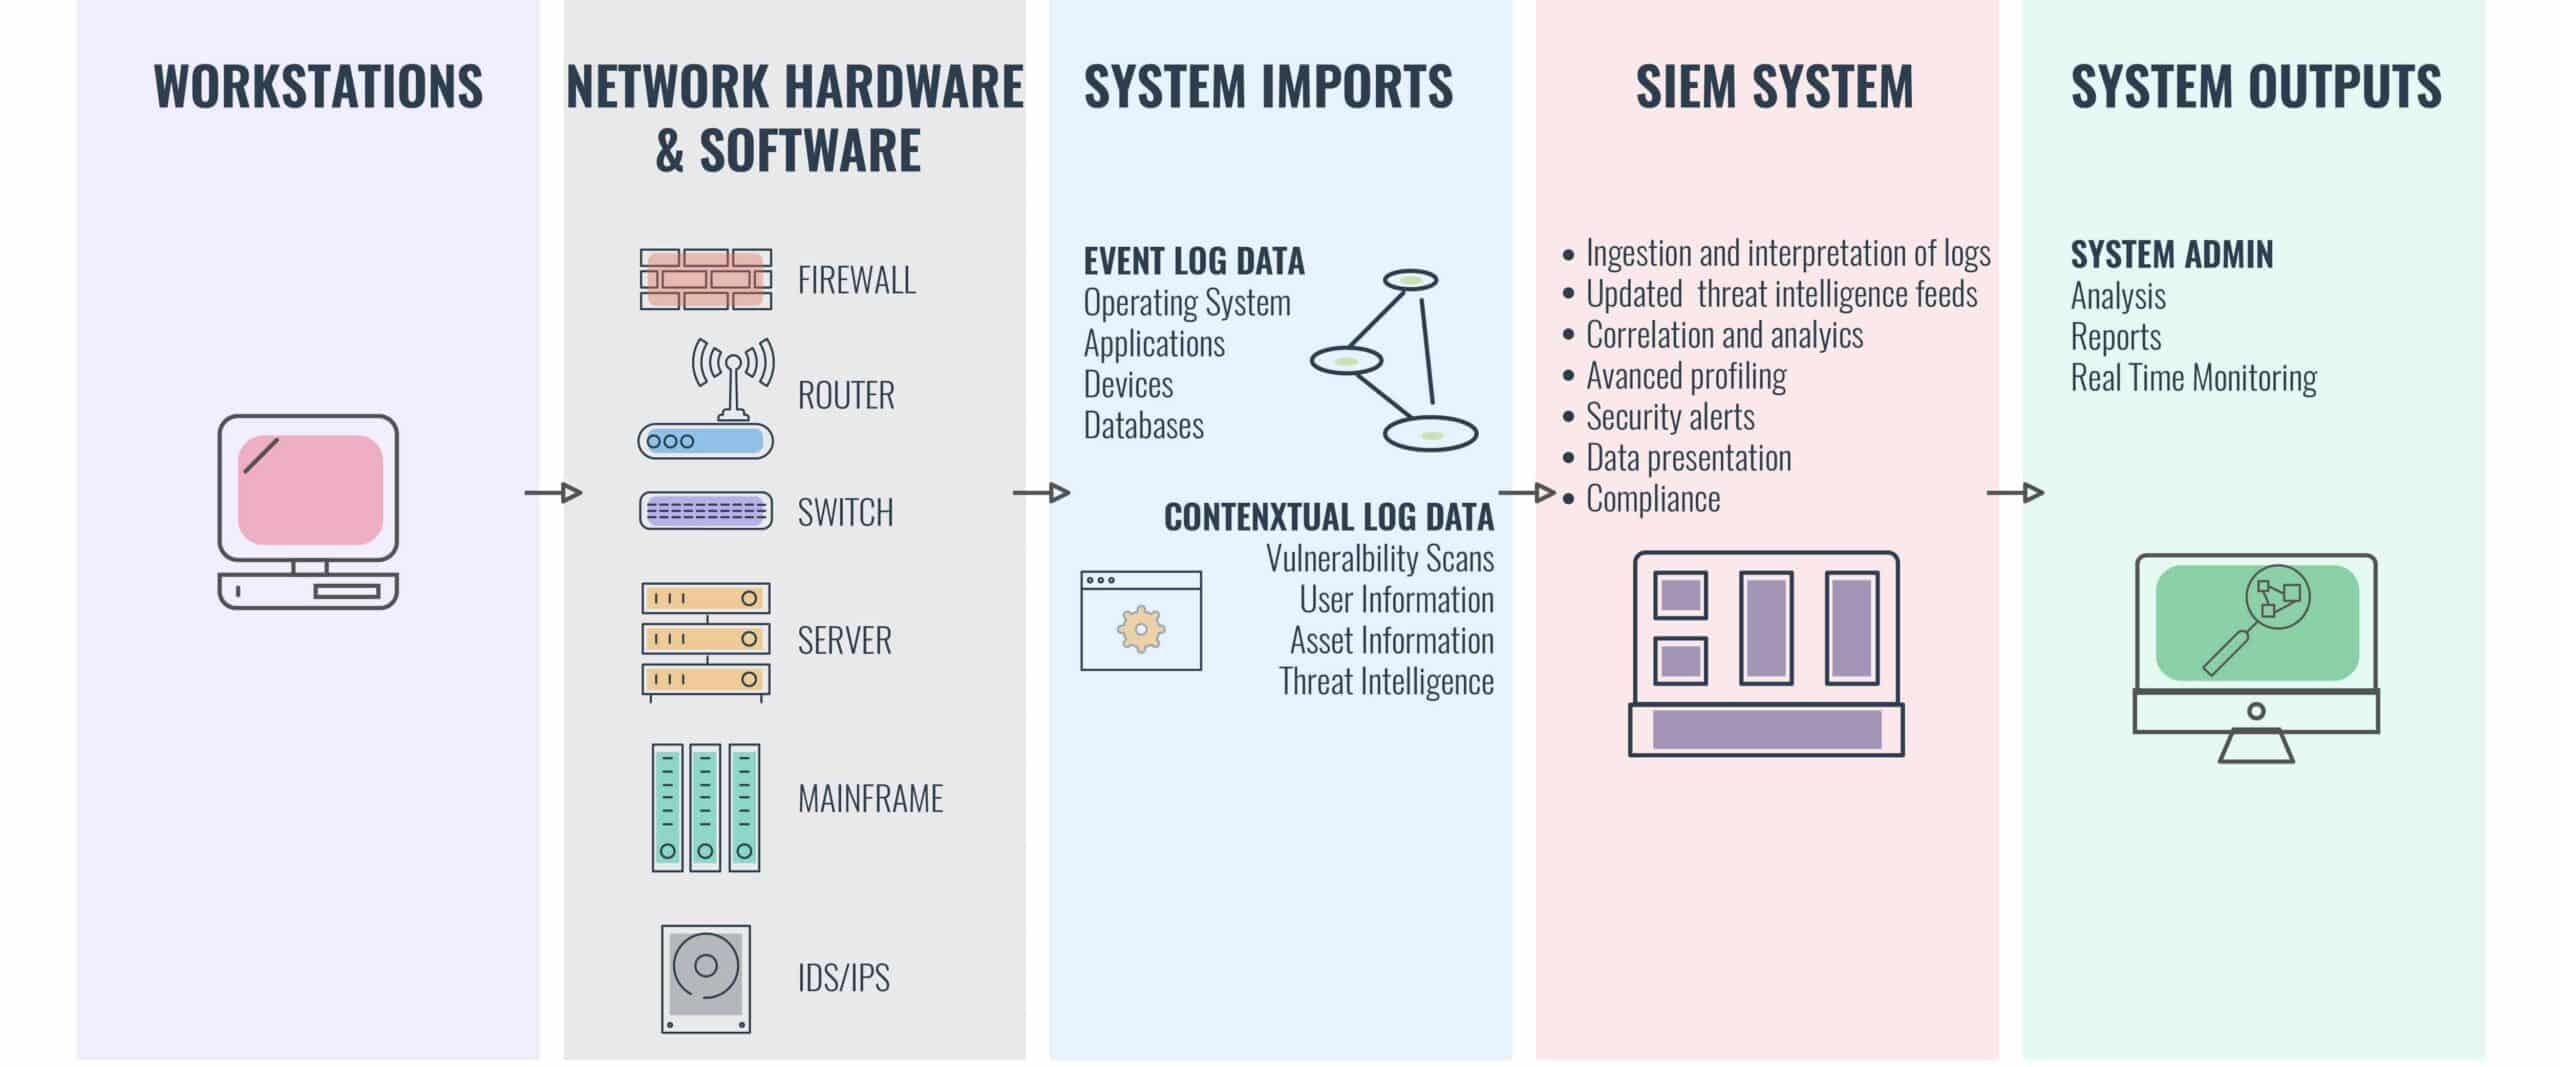 siem tool features